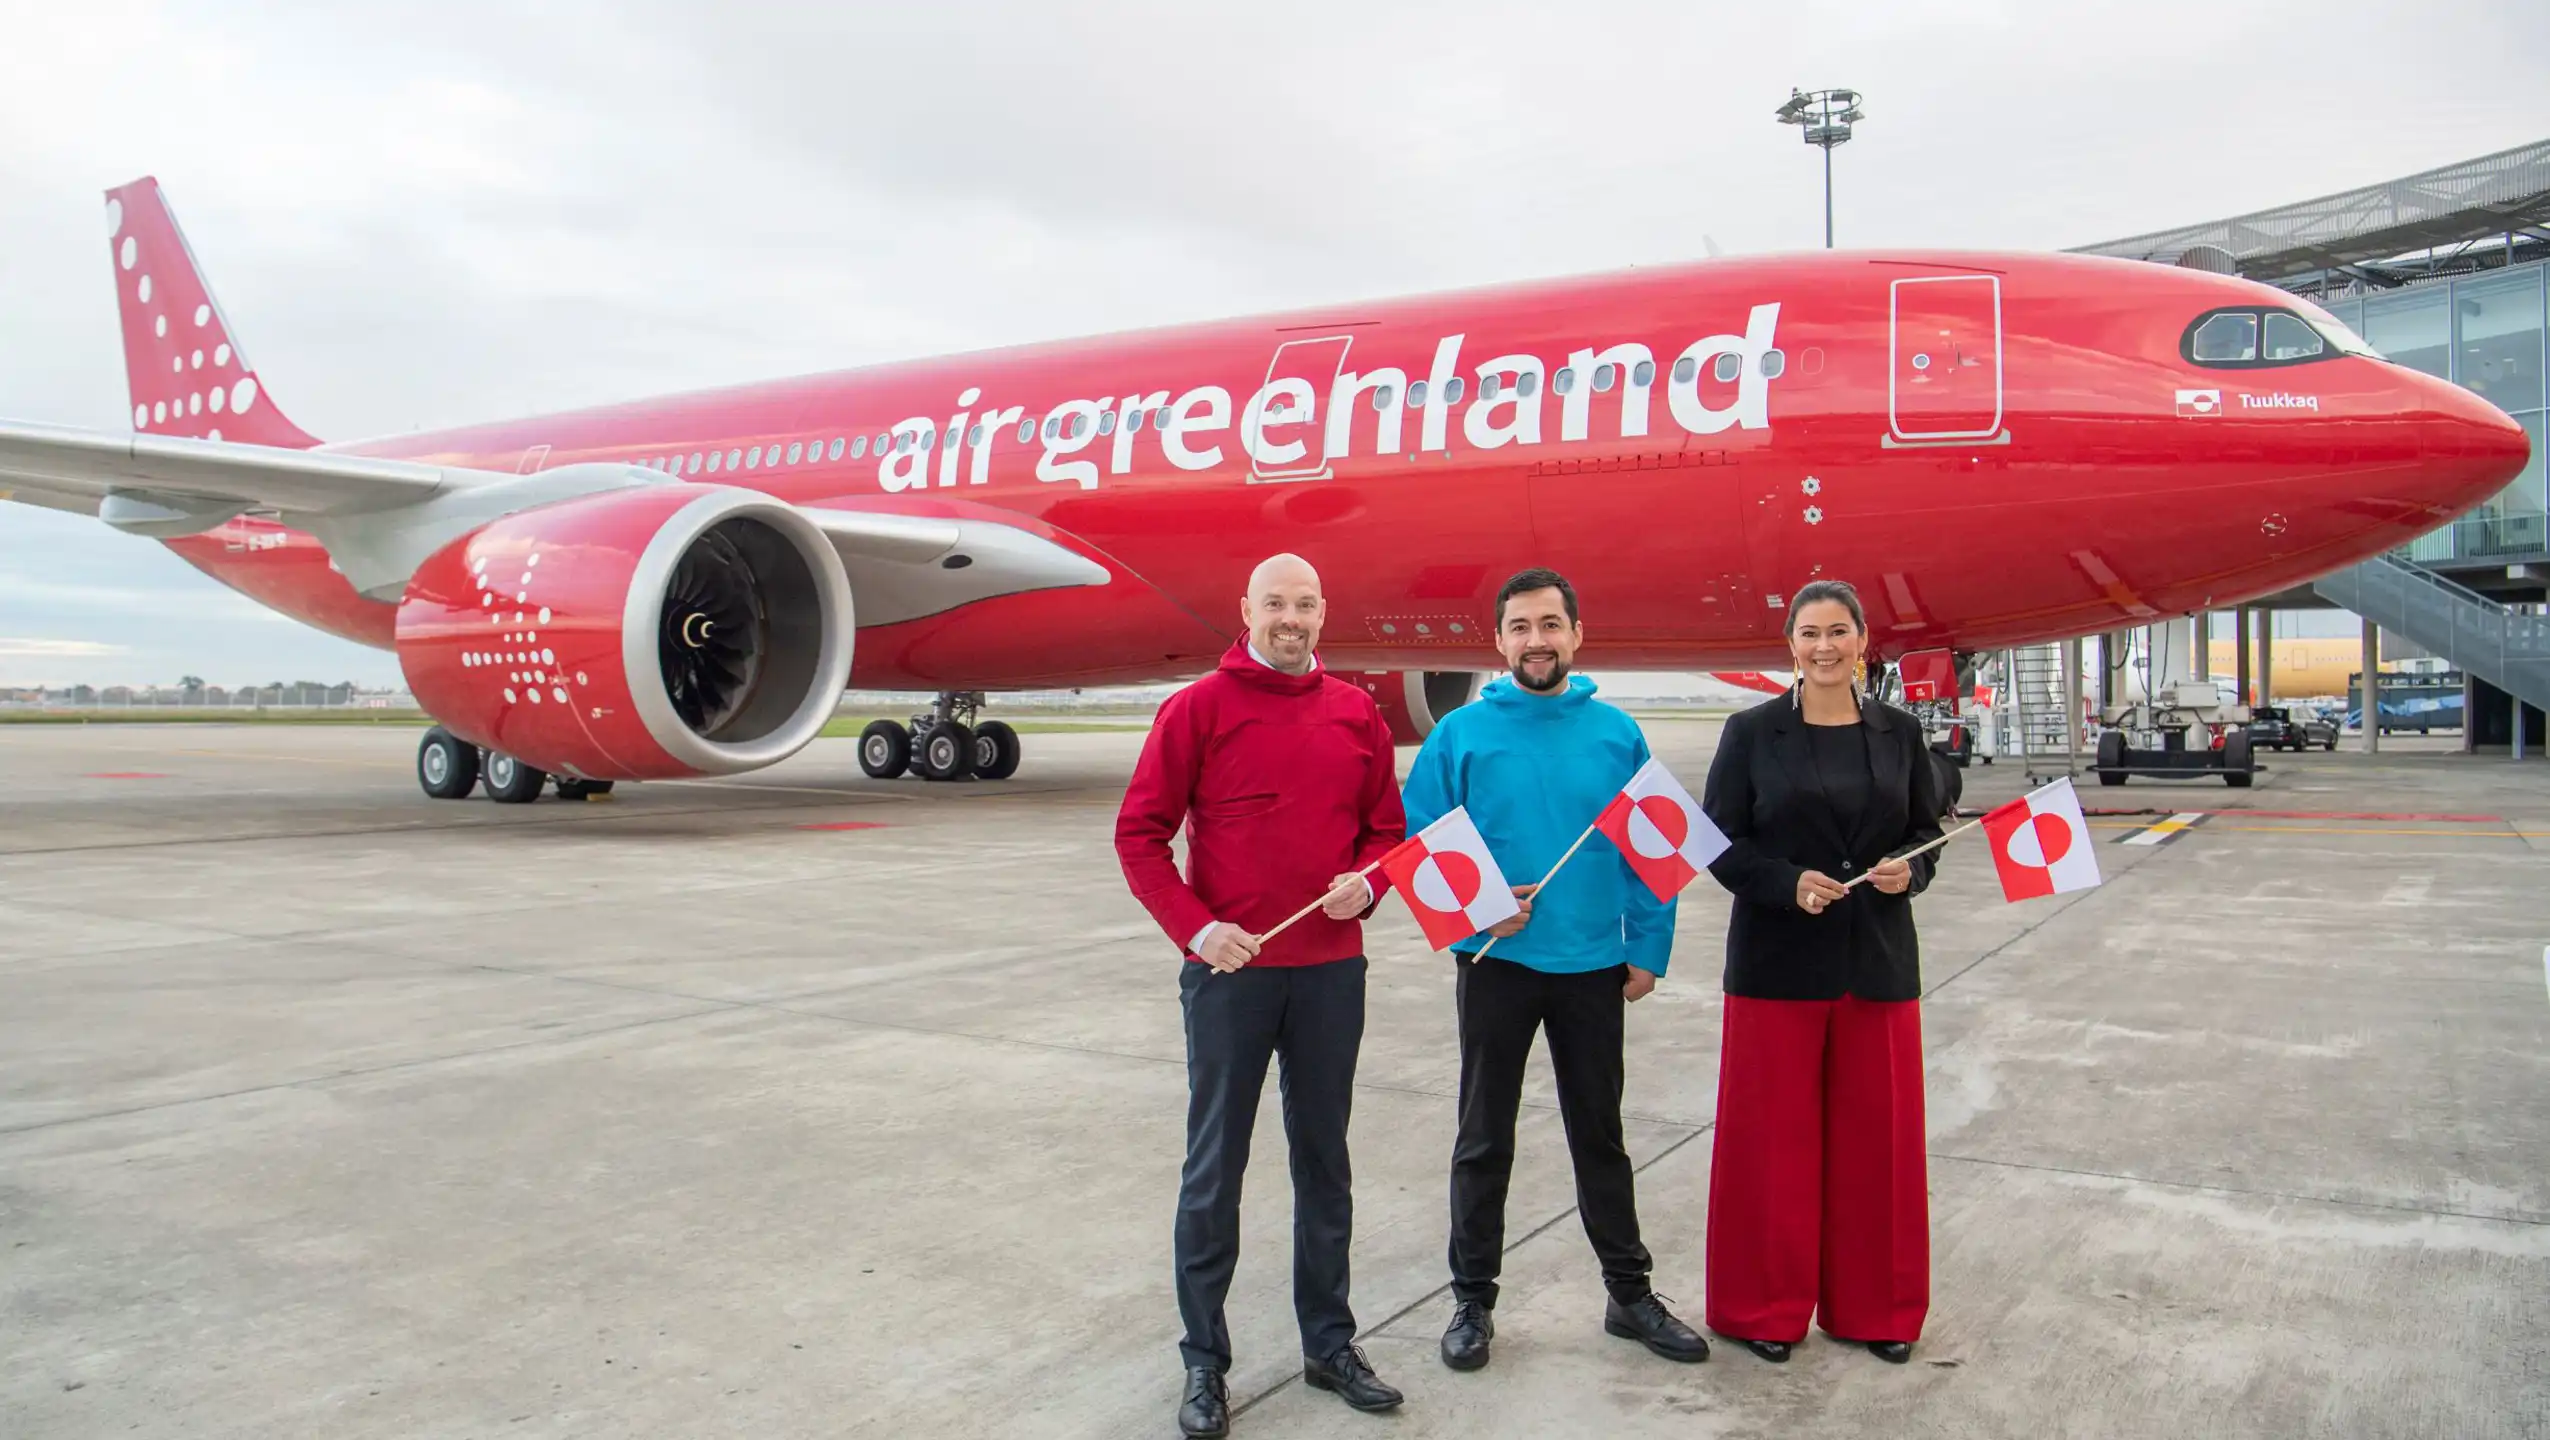 Air Greenland CEO, Jacob Nitter Sørensen, Prime minister of Greenland, Múte B. Egede and Chairwoman of the Board of diretors, Bodil Marie Damgaard